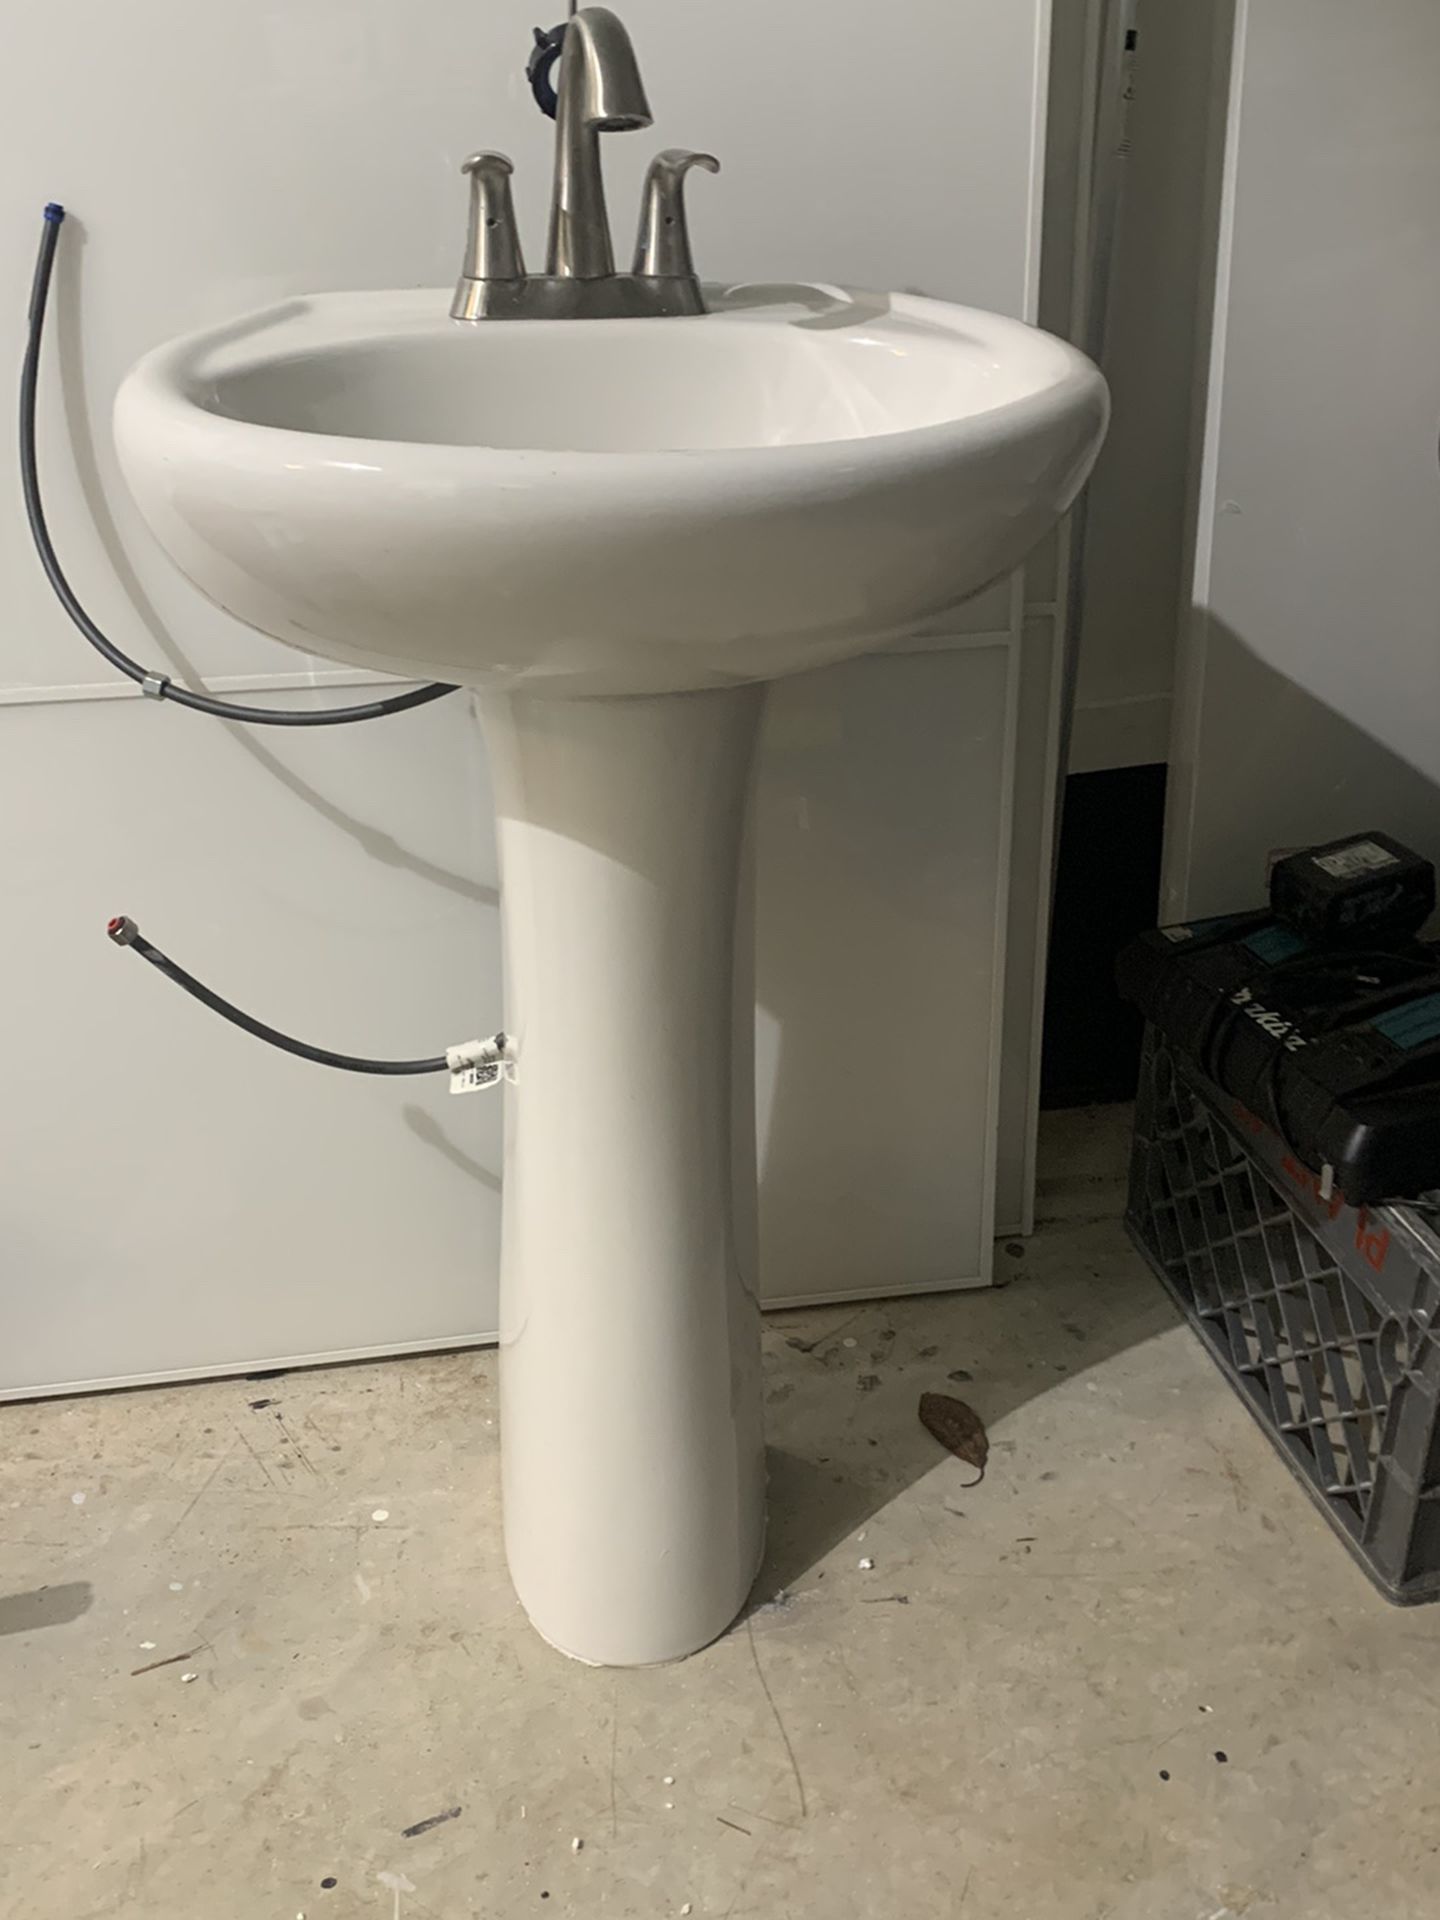 Pedestal sink and faucet in great condition